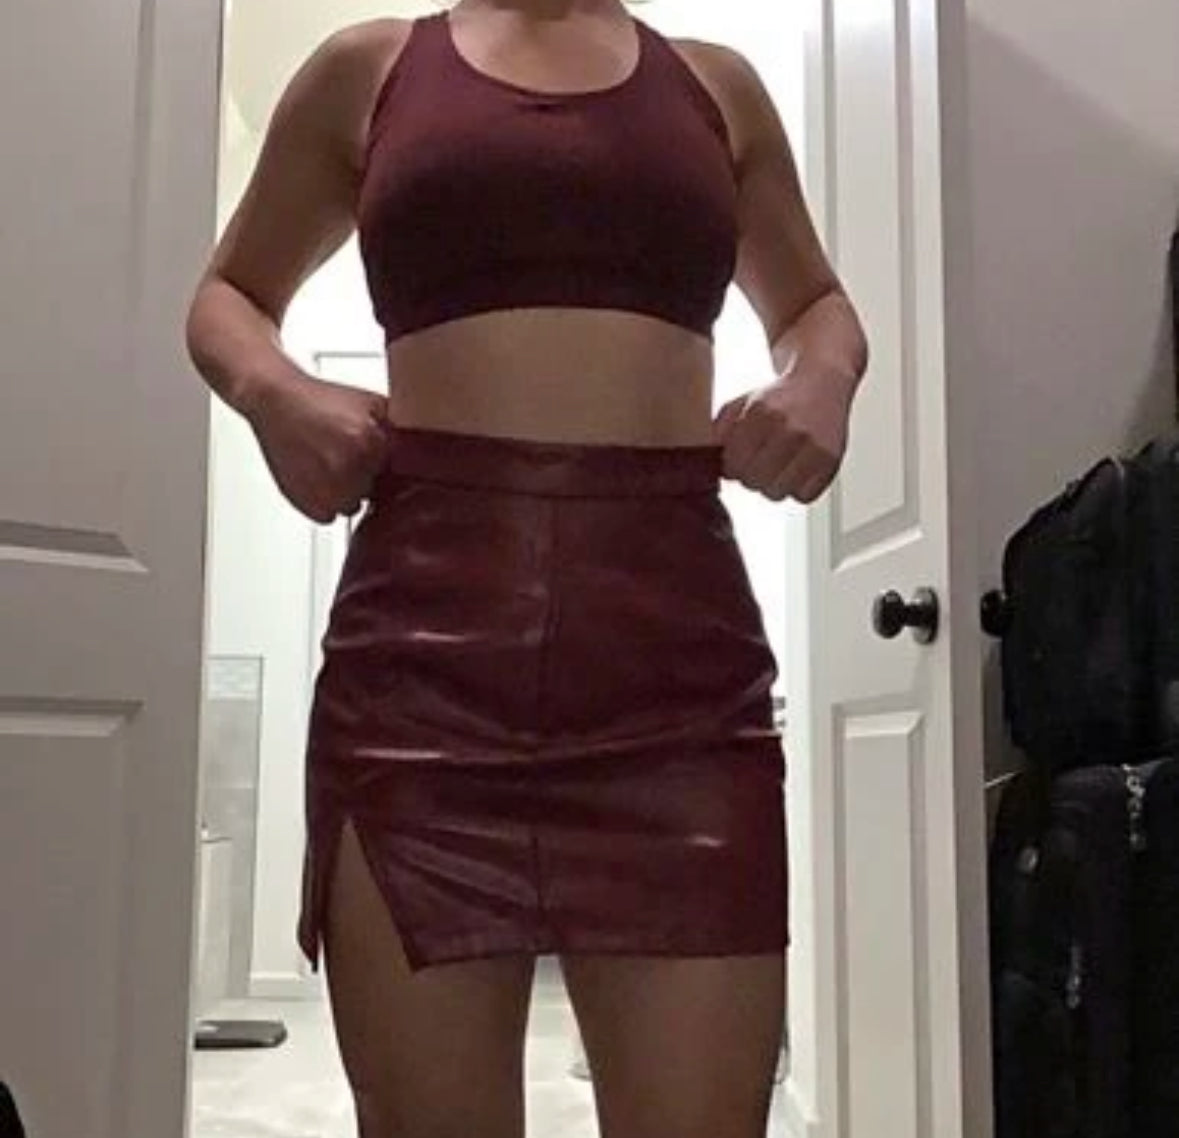 Red sexy work or play skirt